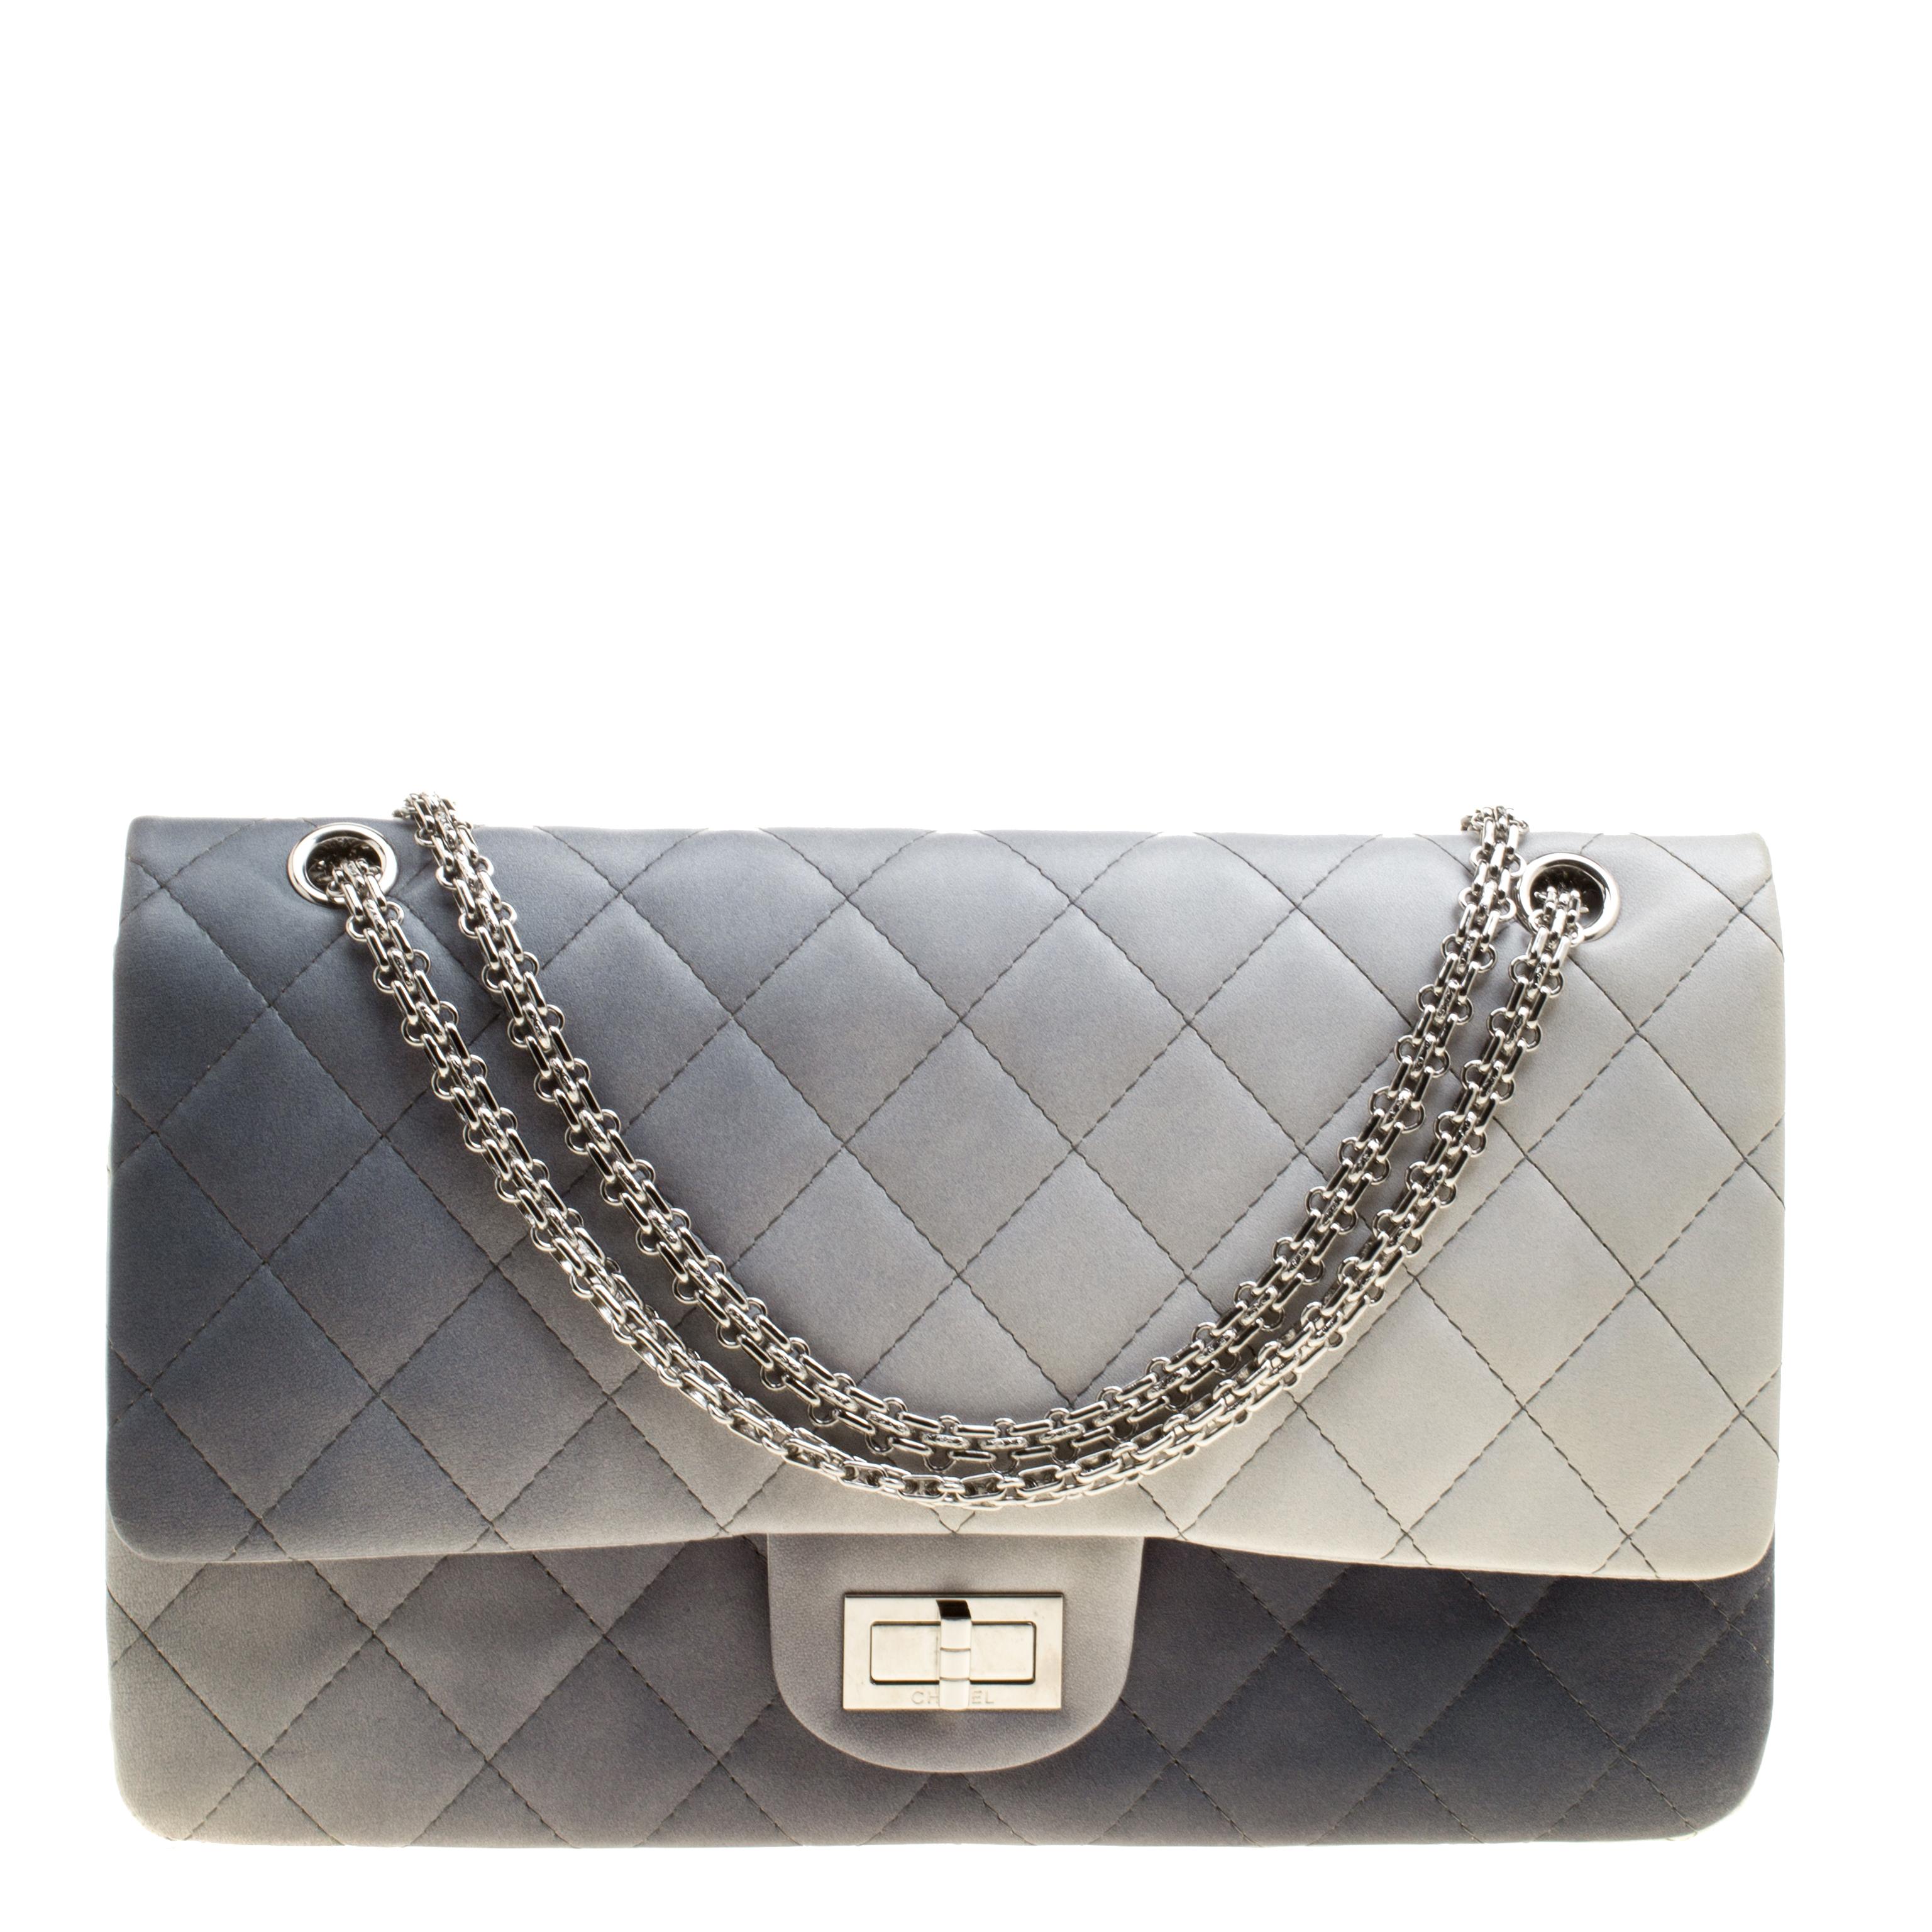 Chanel Multicolor Quilted Leather Reissue 2.55 Classic 227 Flap Bag